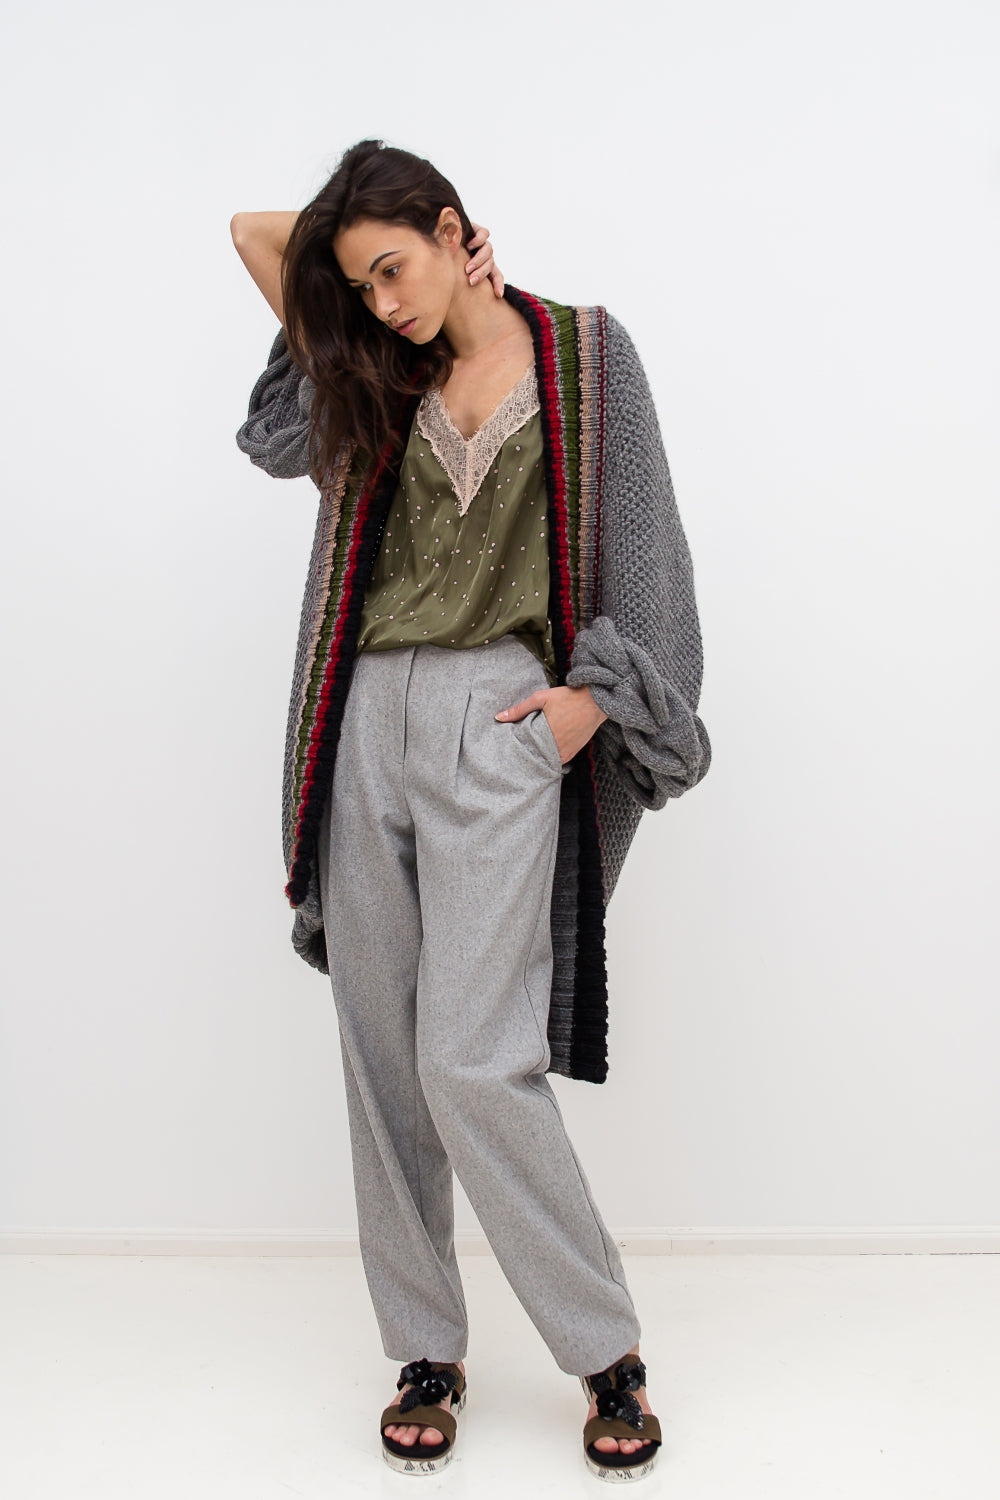 Knitted grey cardigan with braids